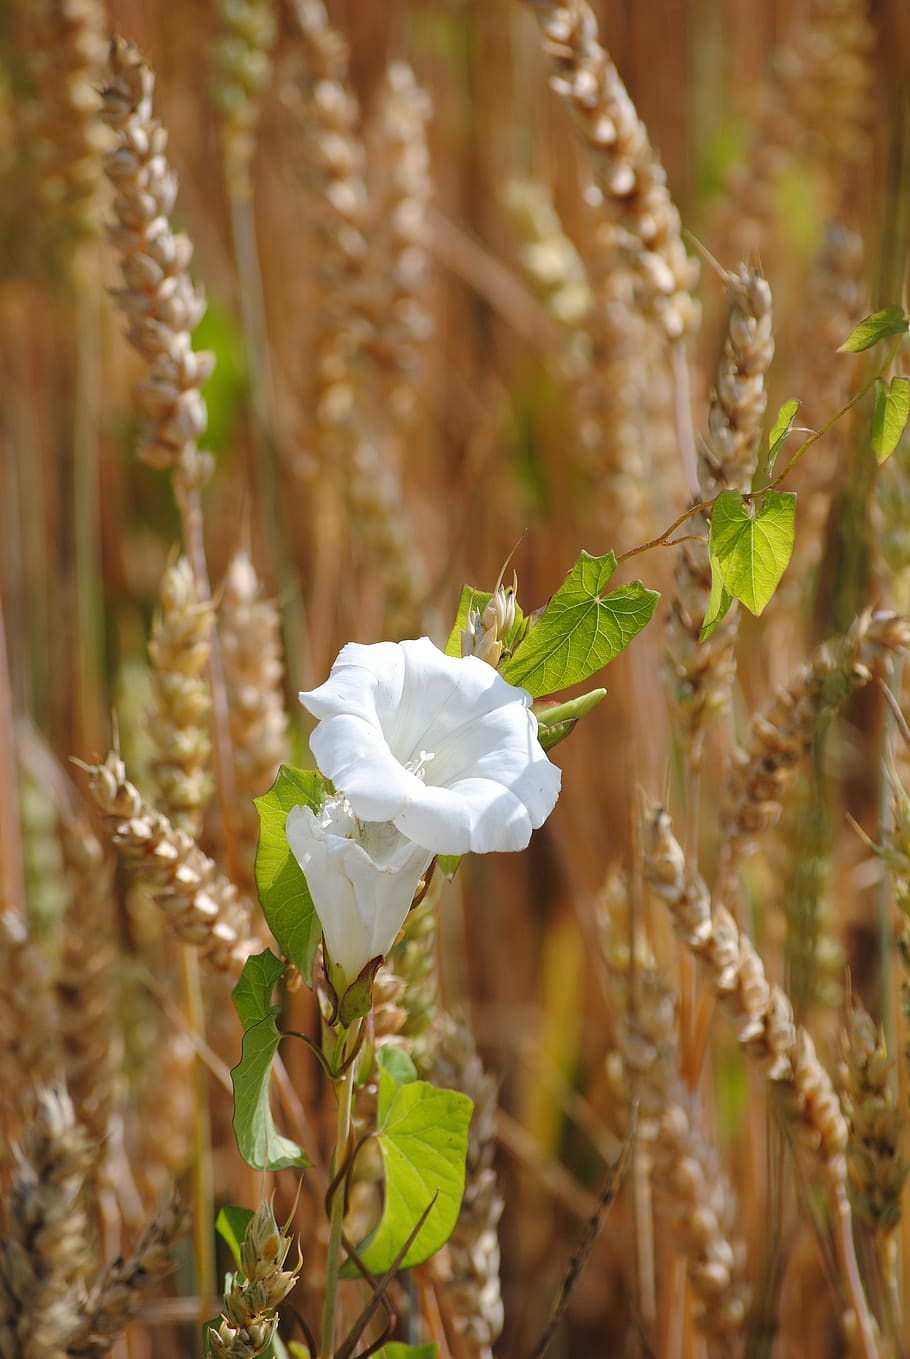 bindweed, winds, climber plant, flower, white, wheat, spike, HD wallpaper